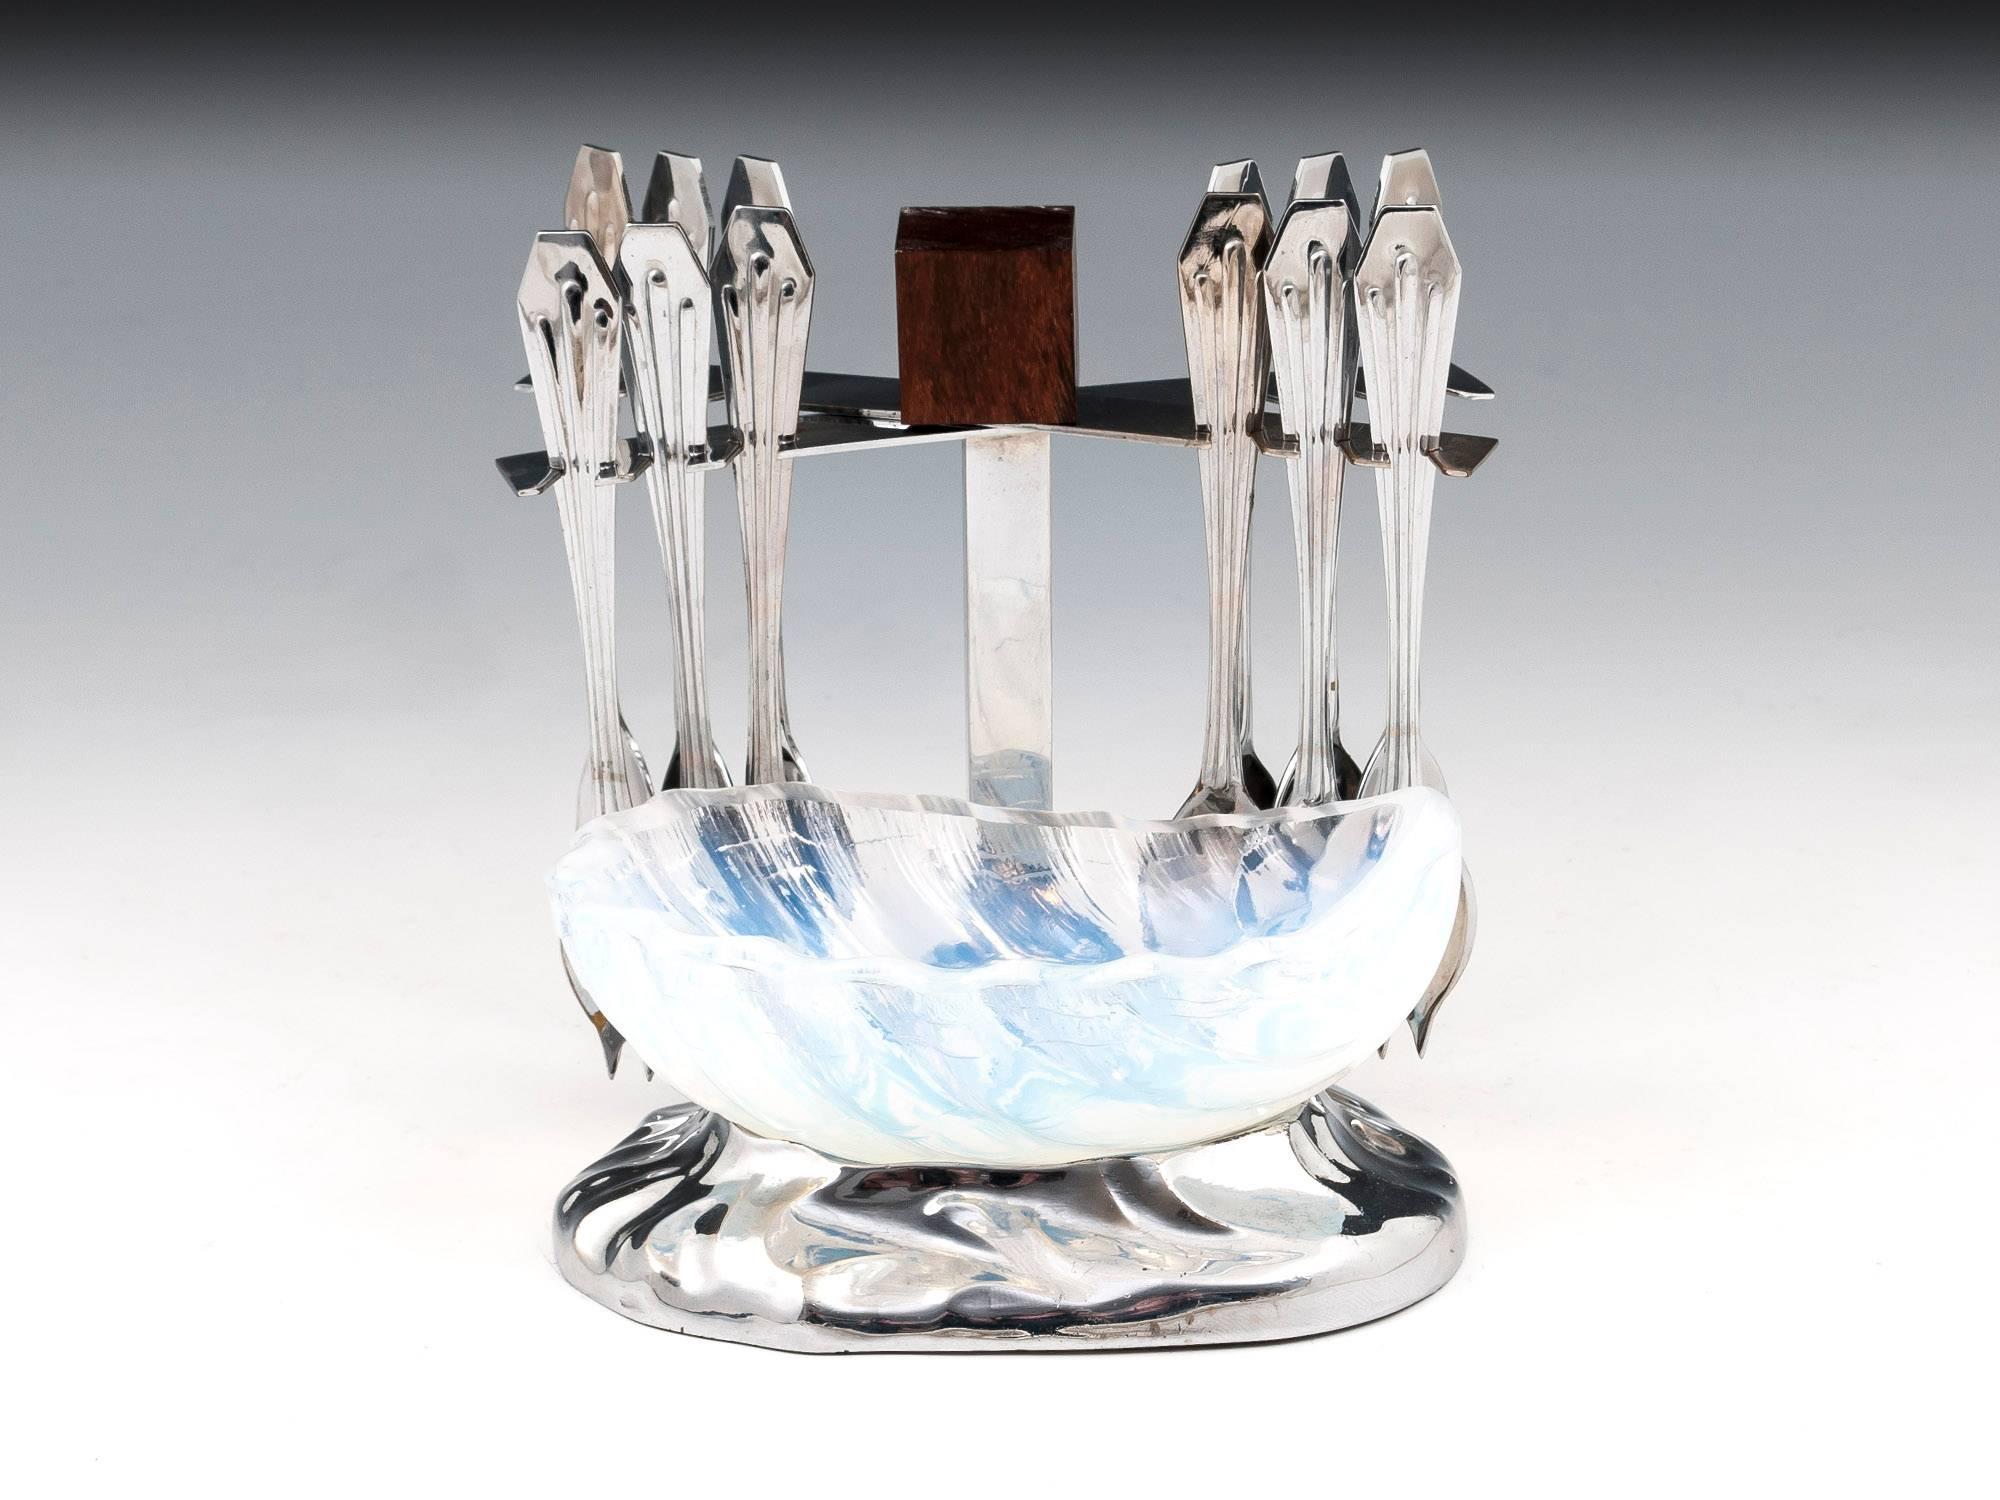 Art Deco oyster spoon set by Jaque Adnet comprising twelve silver plate spoons housed in a plated stand with a shaped base and stunning opalescent oyster bowl, the top of the stand has a Macassar ebony block for ease of handling.